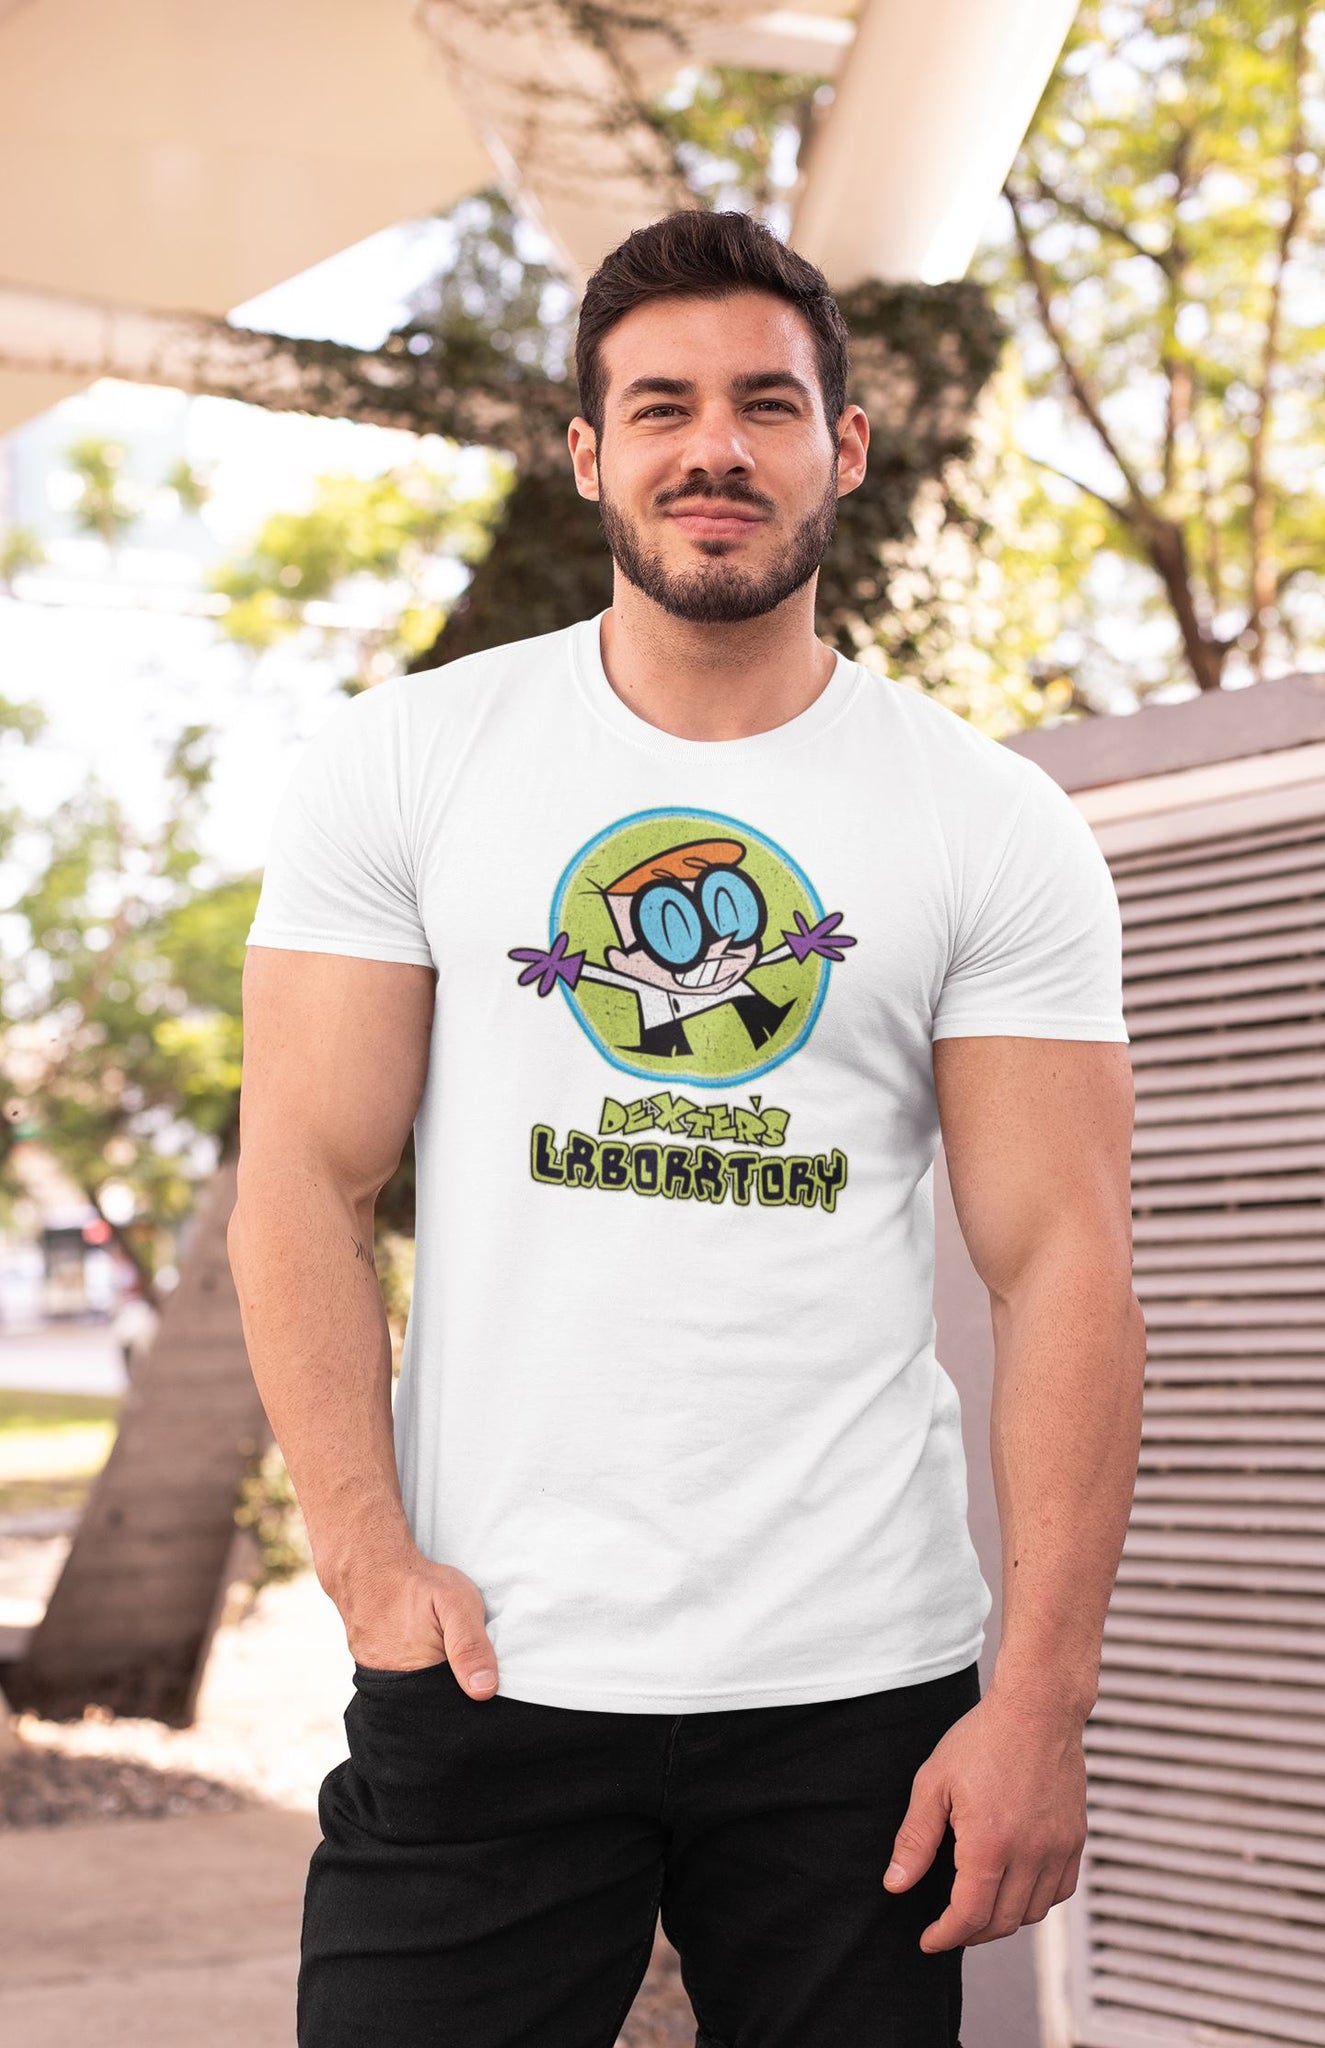 Dexter's Laboratory Official White T Shirt for Men and Women freeshipping - Catch My Drift India